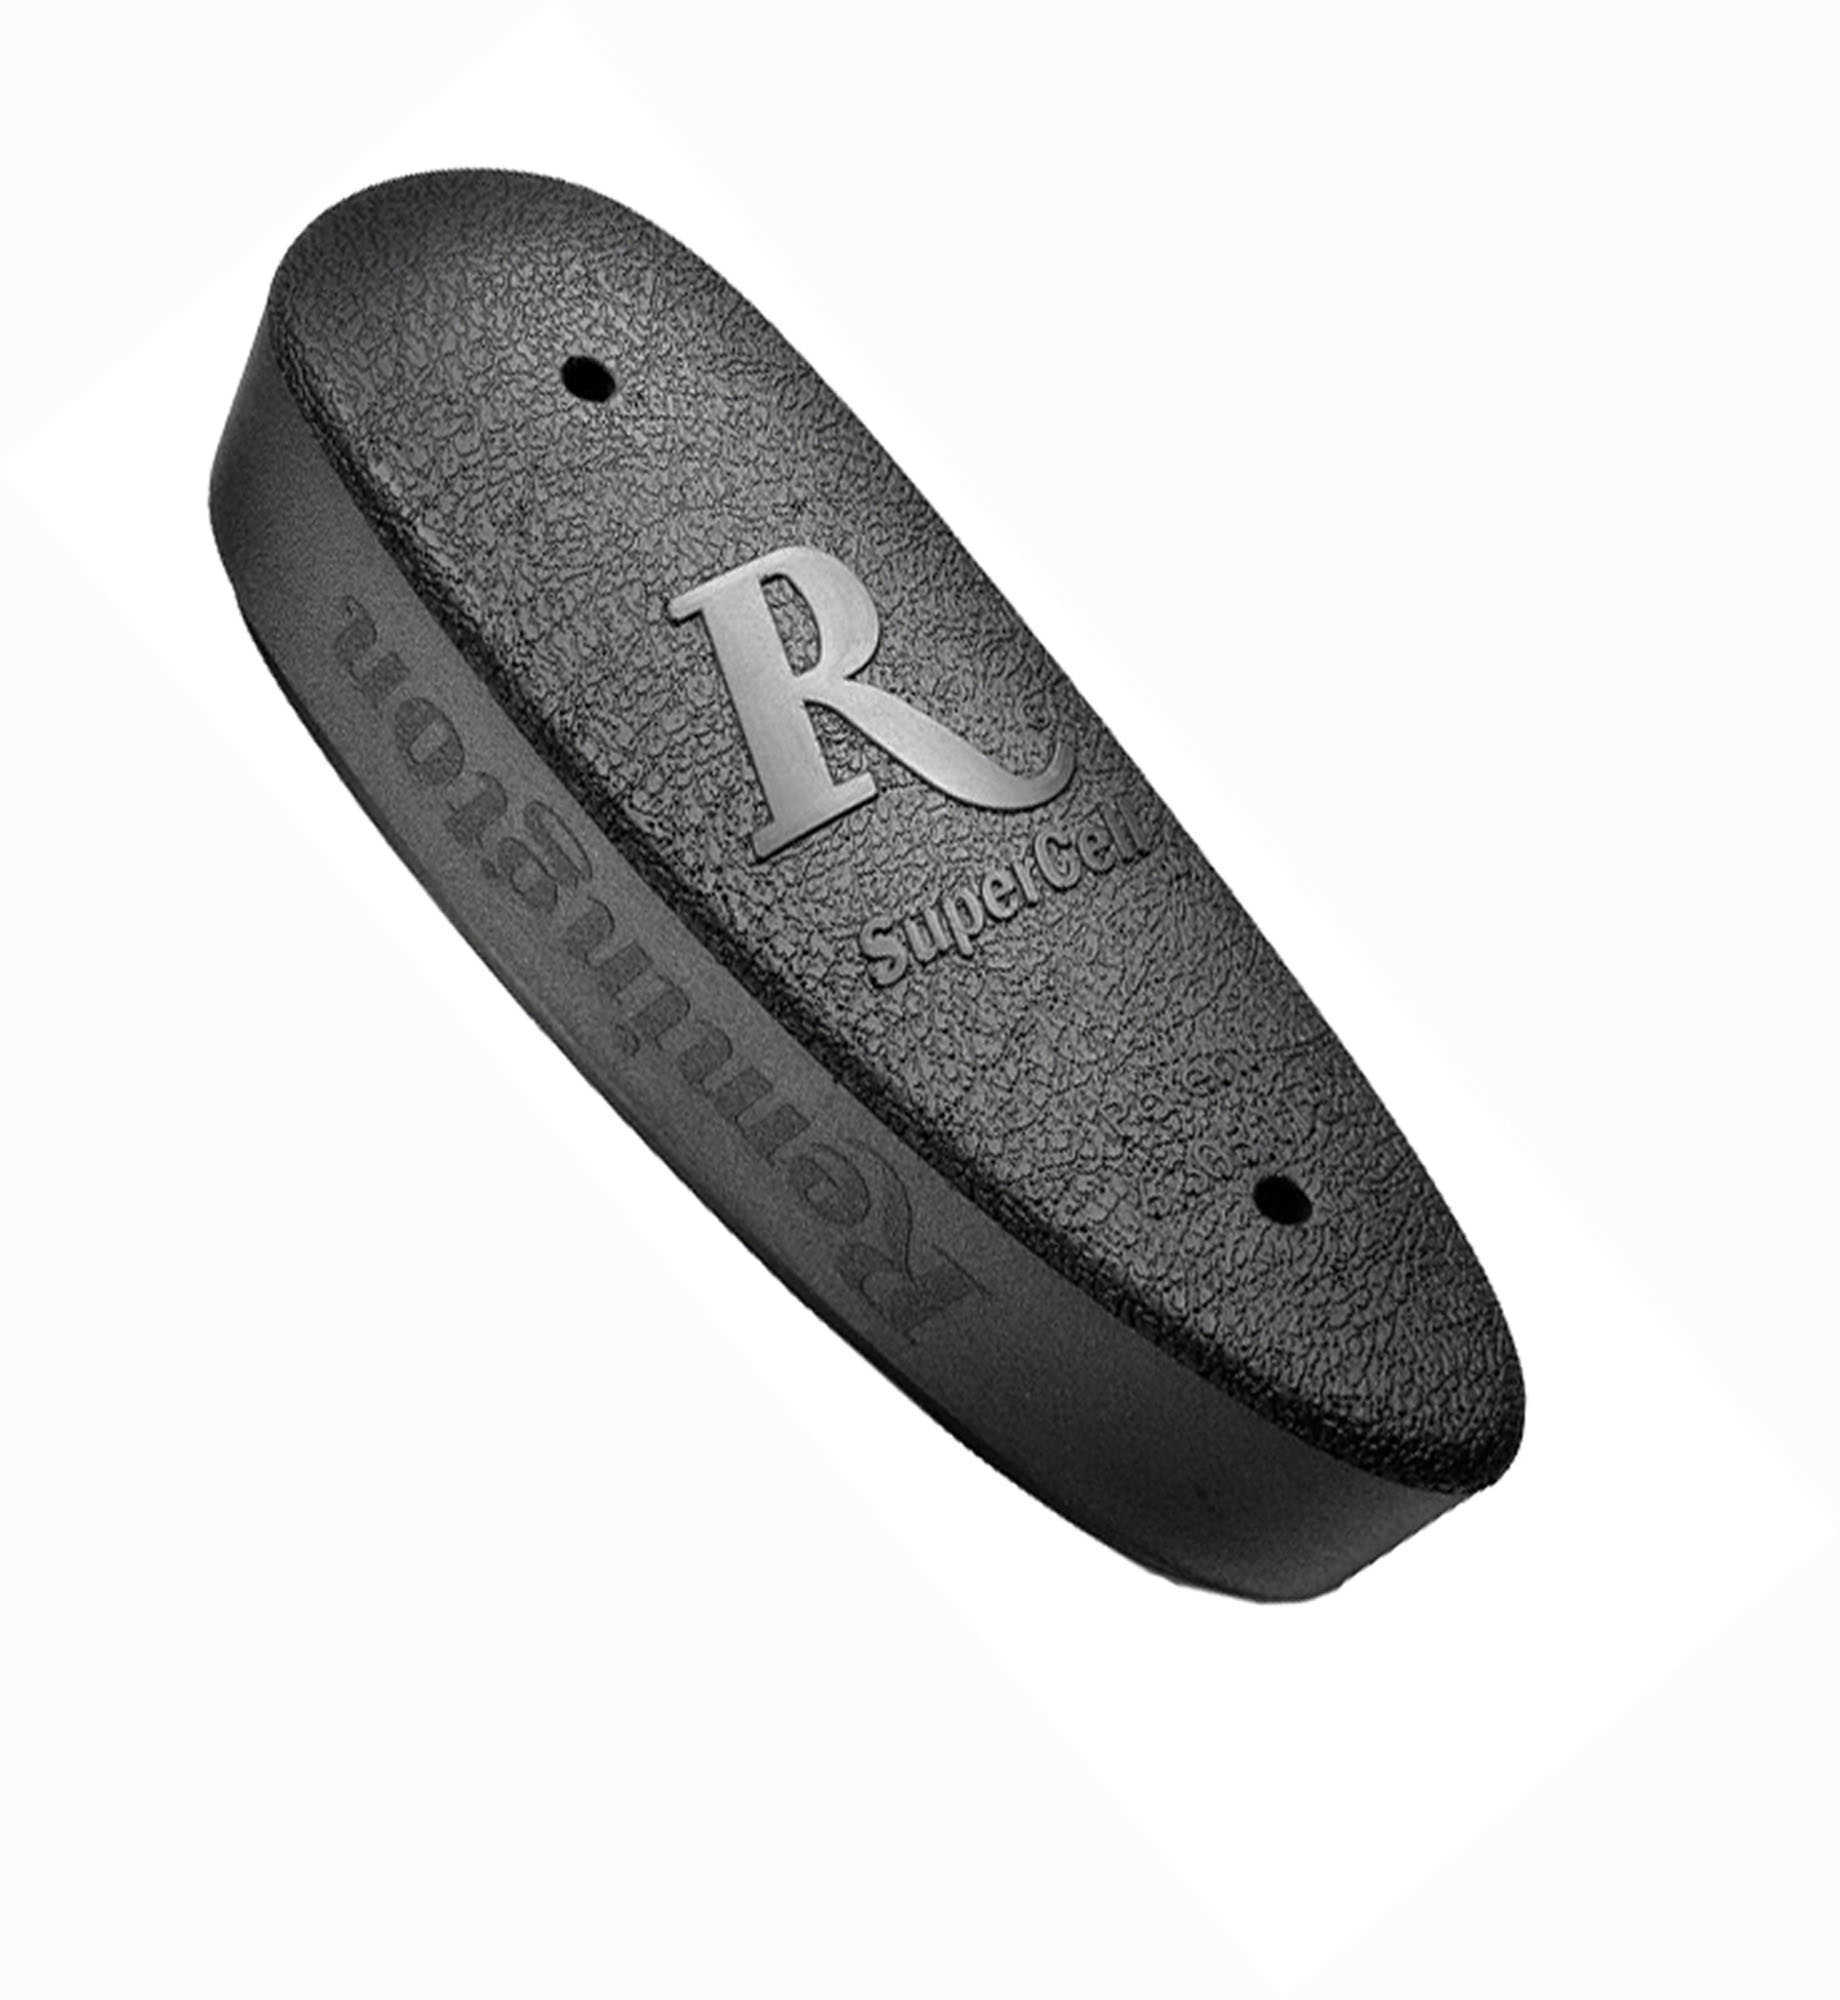 Remington Brown Wood Supercell Recoil Pad Md: 19471